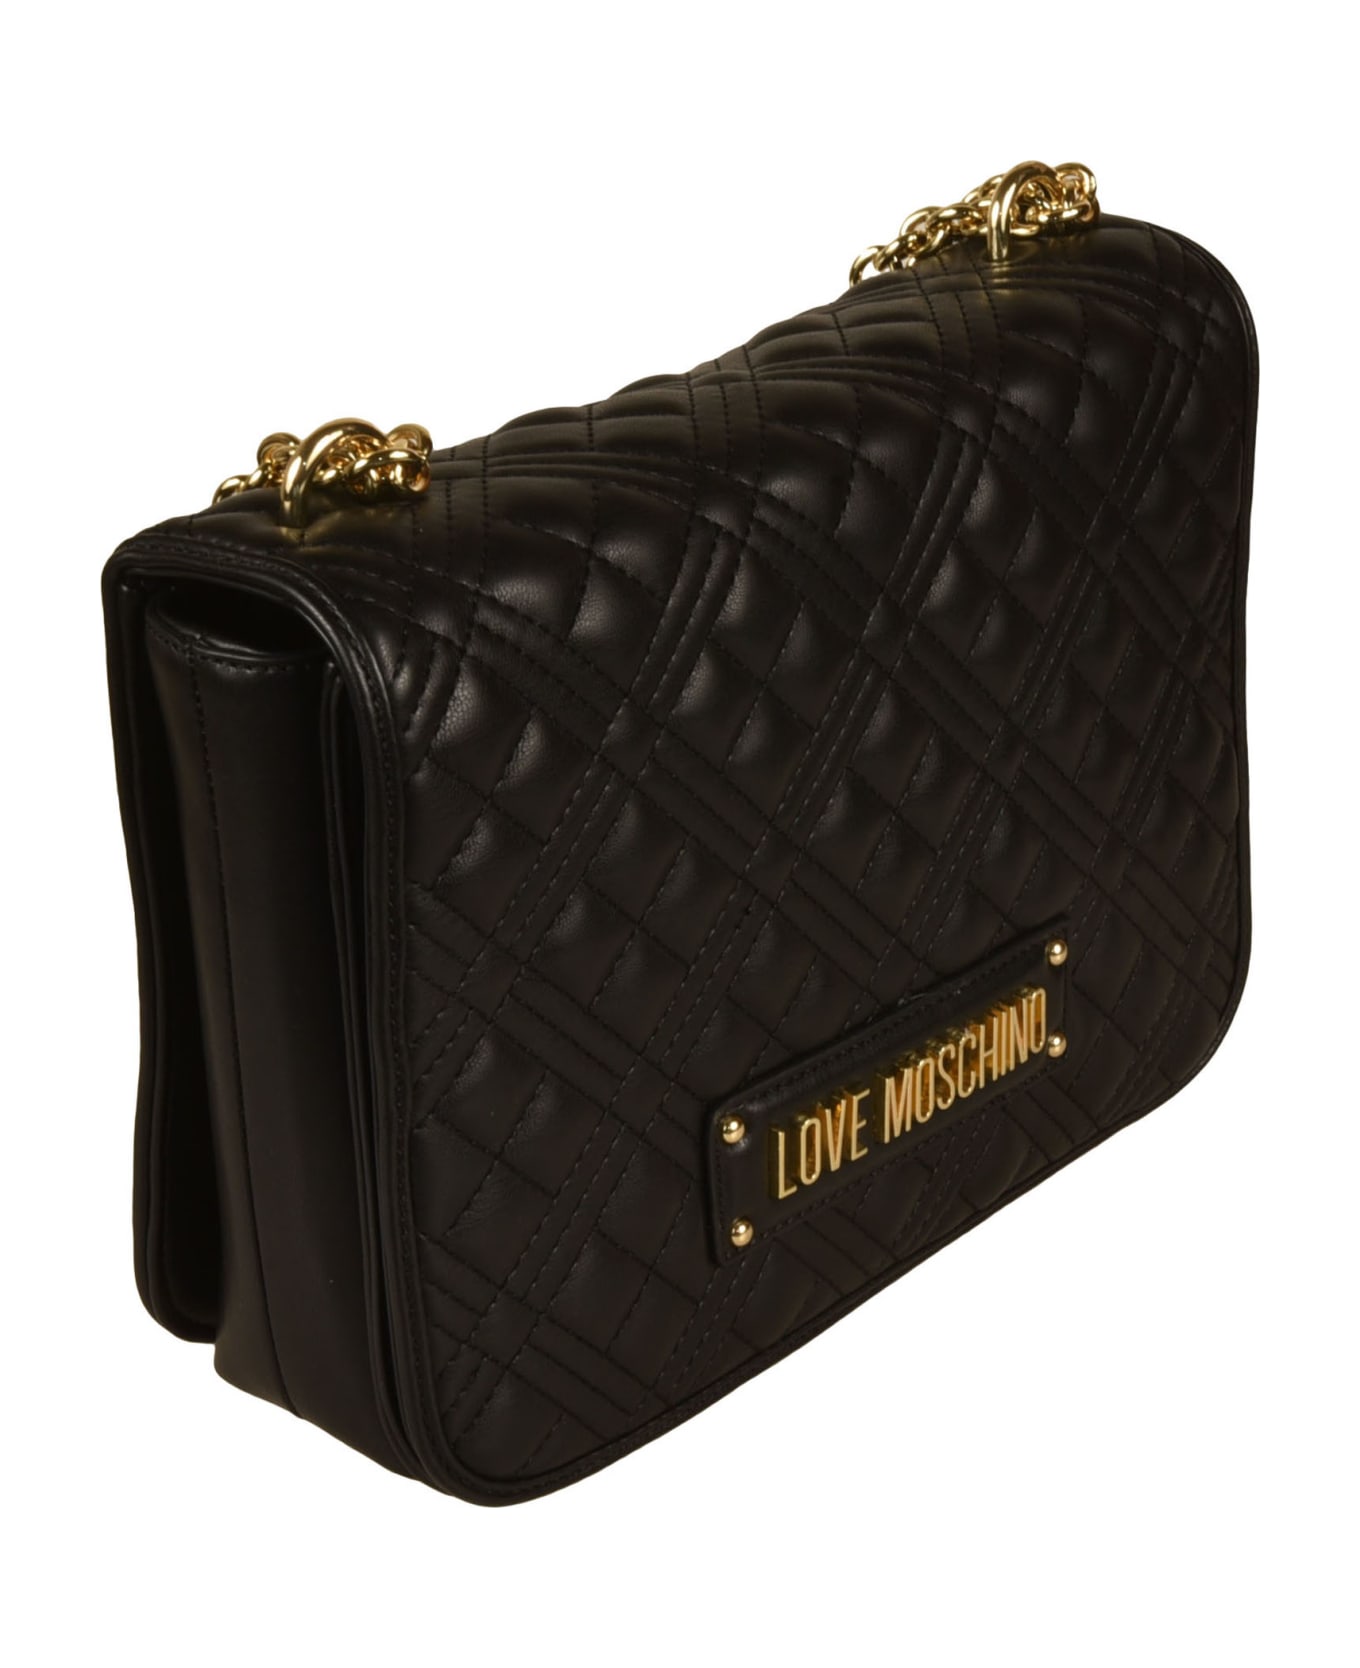 Love Moschino Logo Plaque Quilted Shoulder Bag - Black ショルダーバッグ